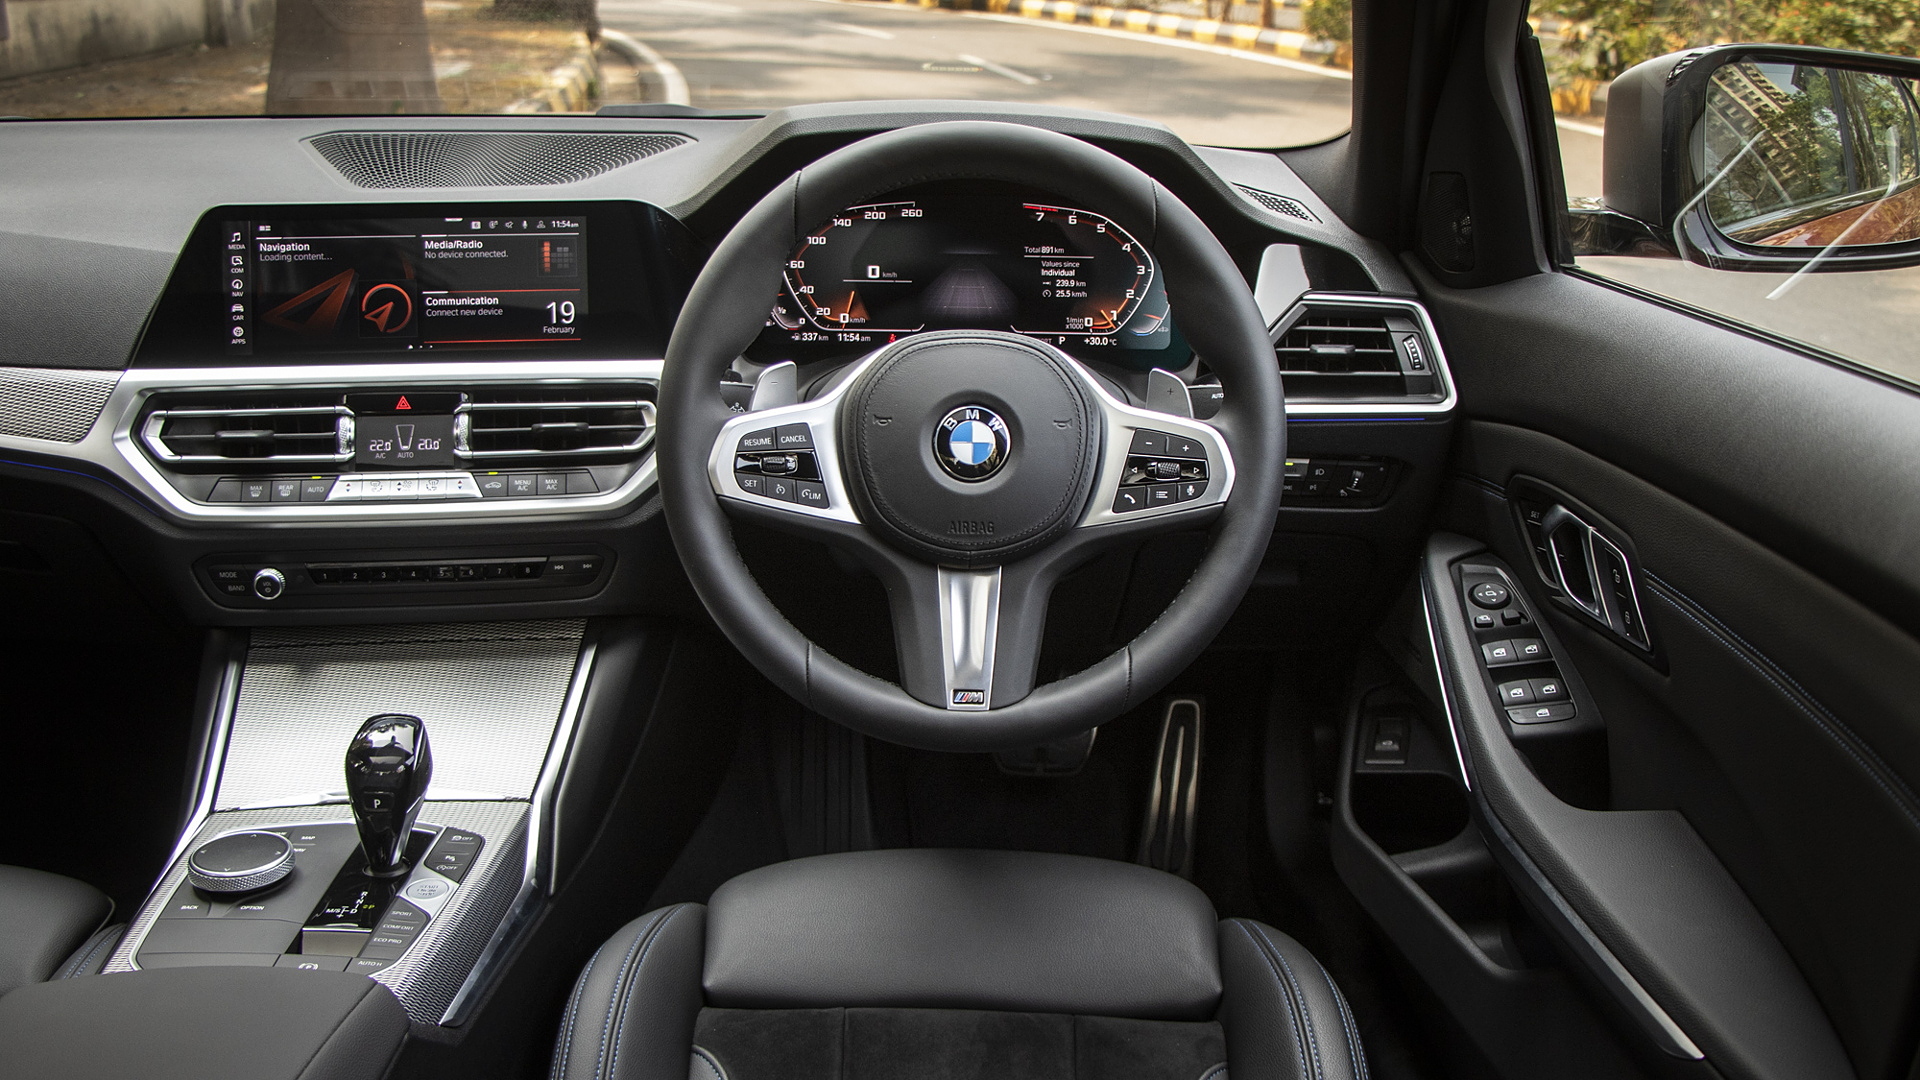 Datum worker be quiet BMW 3 Series Images - Interior & Exterior Photo Gallery [300+ Images] -  CarWale